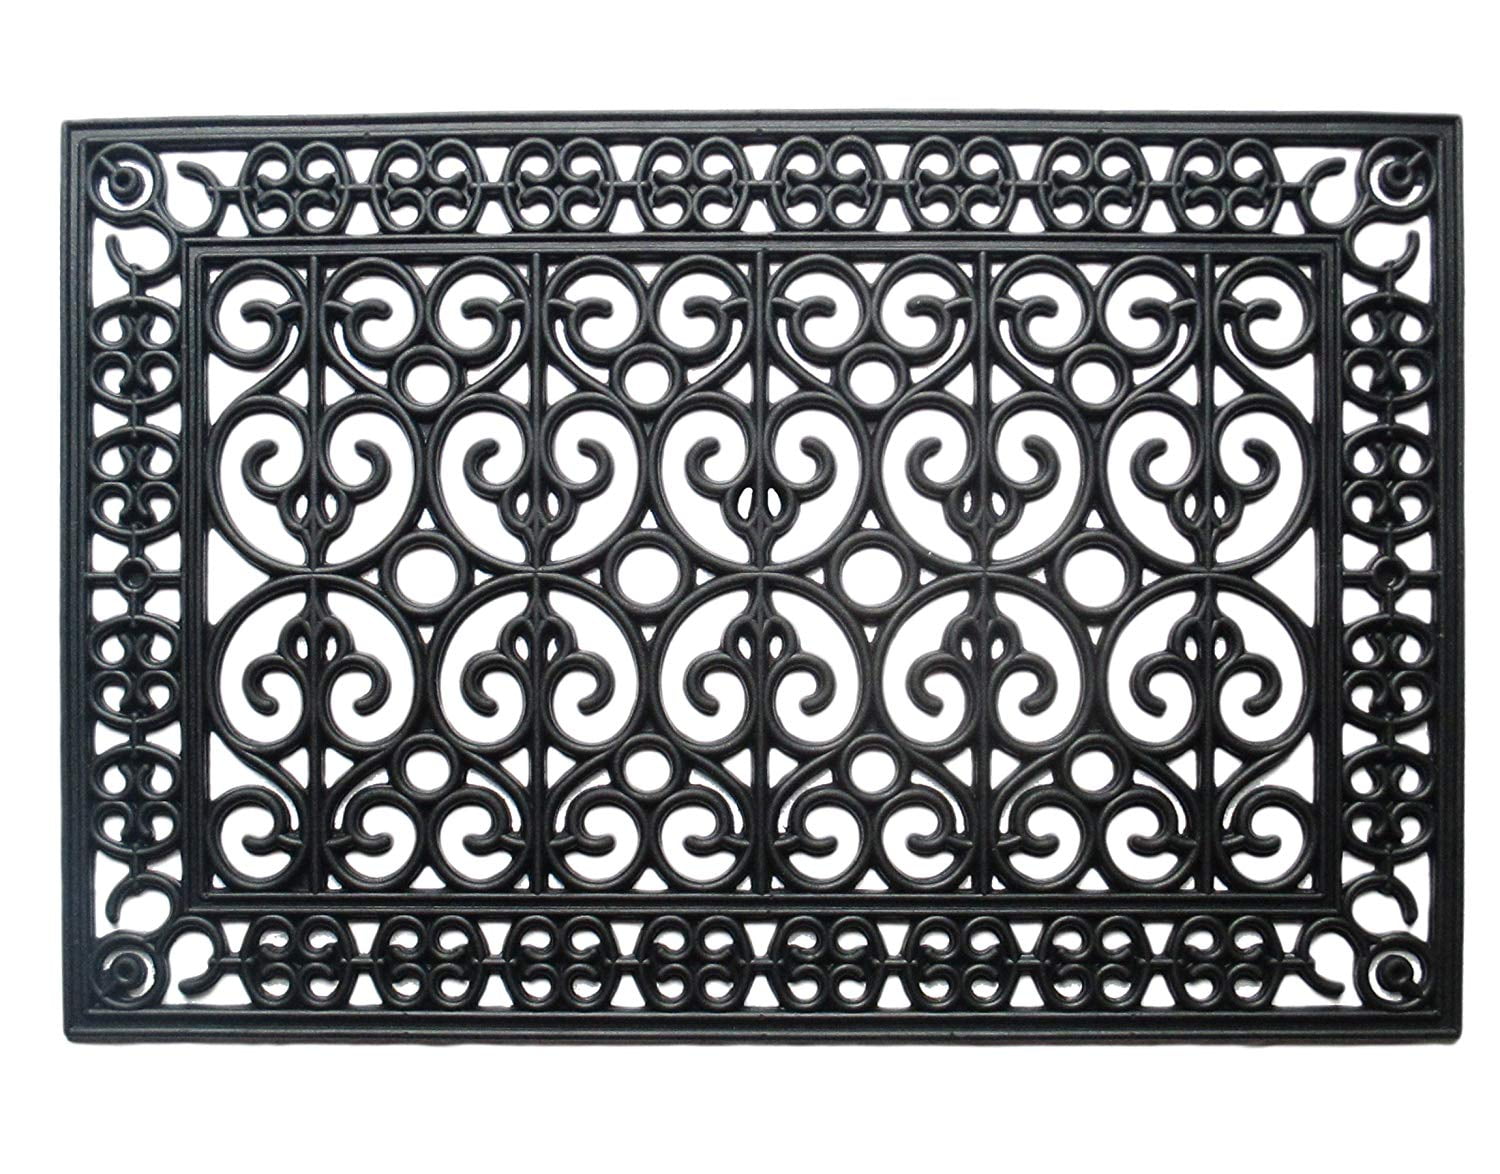 A1 Home Collections A1HC Black 24 in. x 36 in. Rubber Grill Indoor